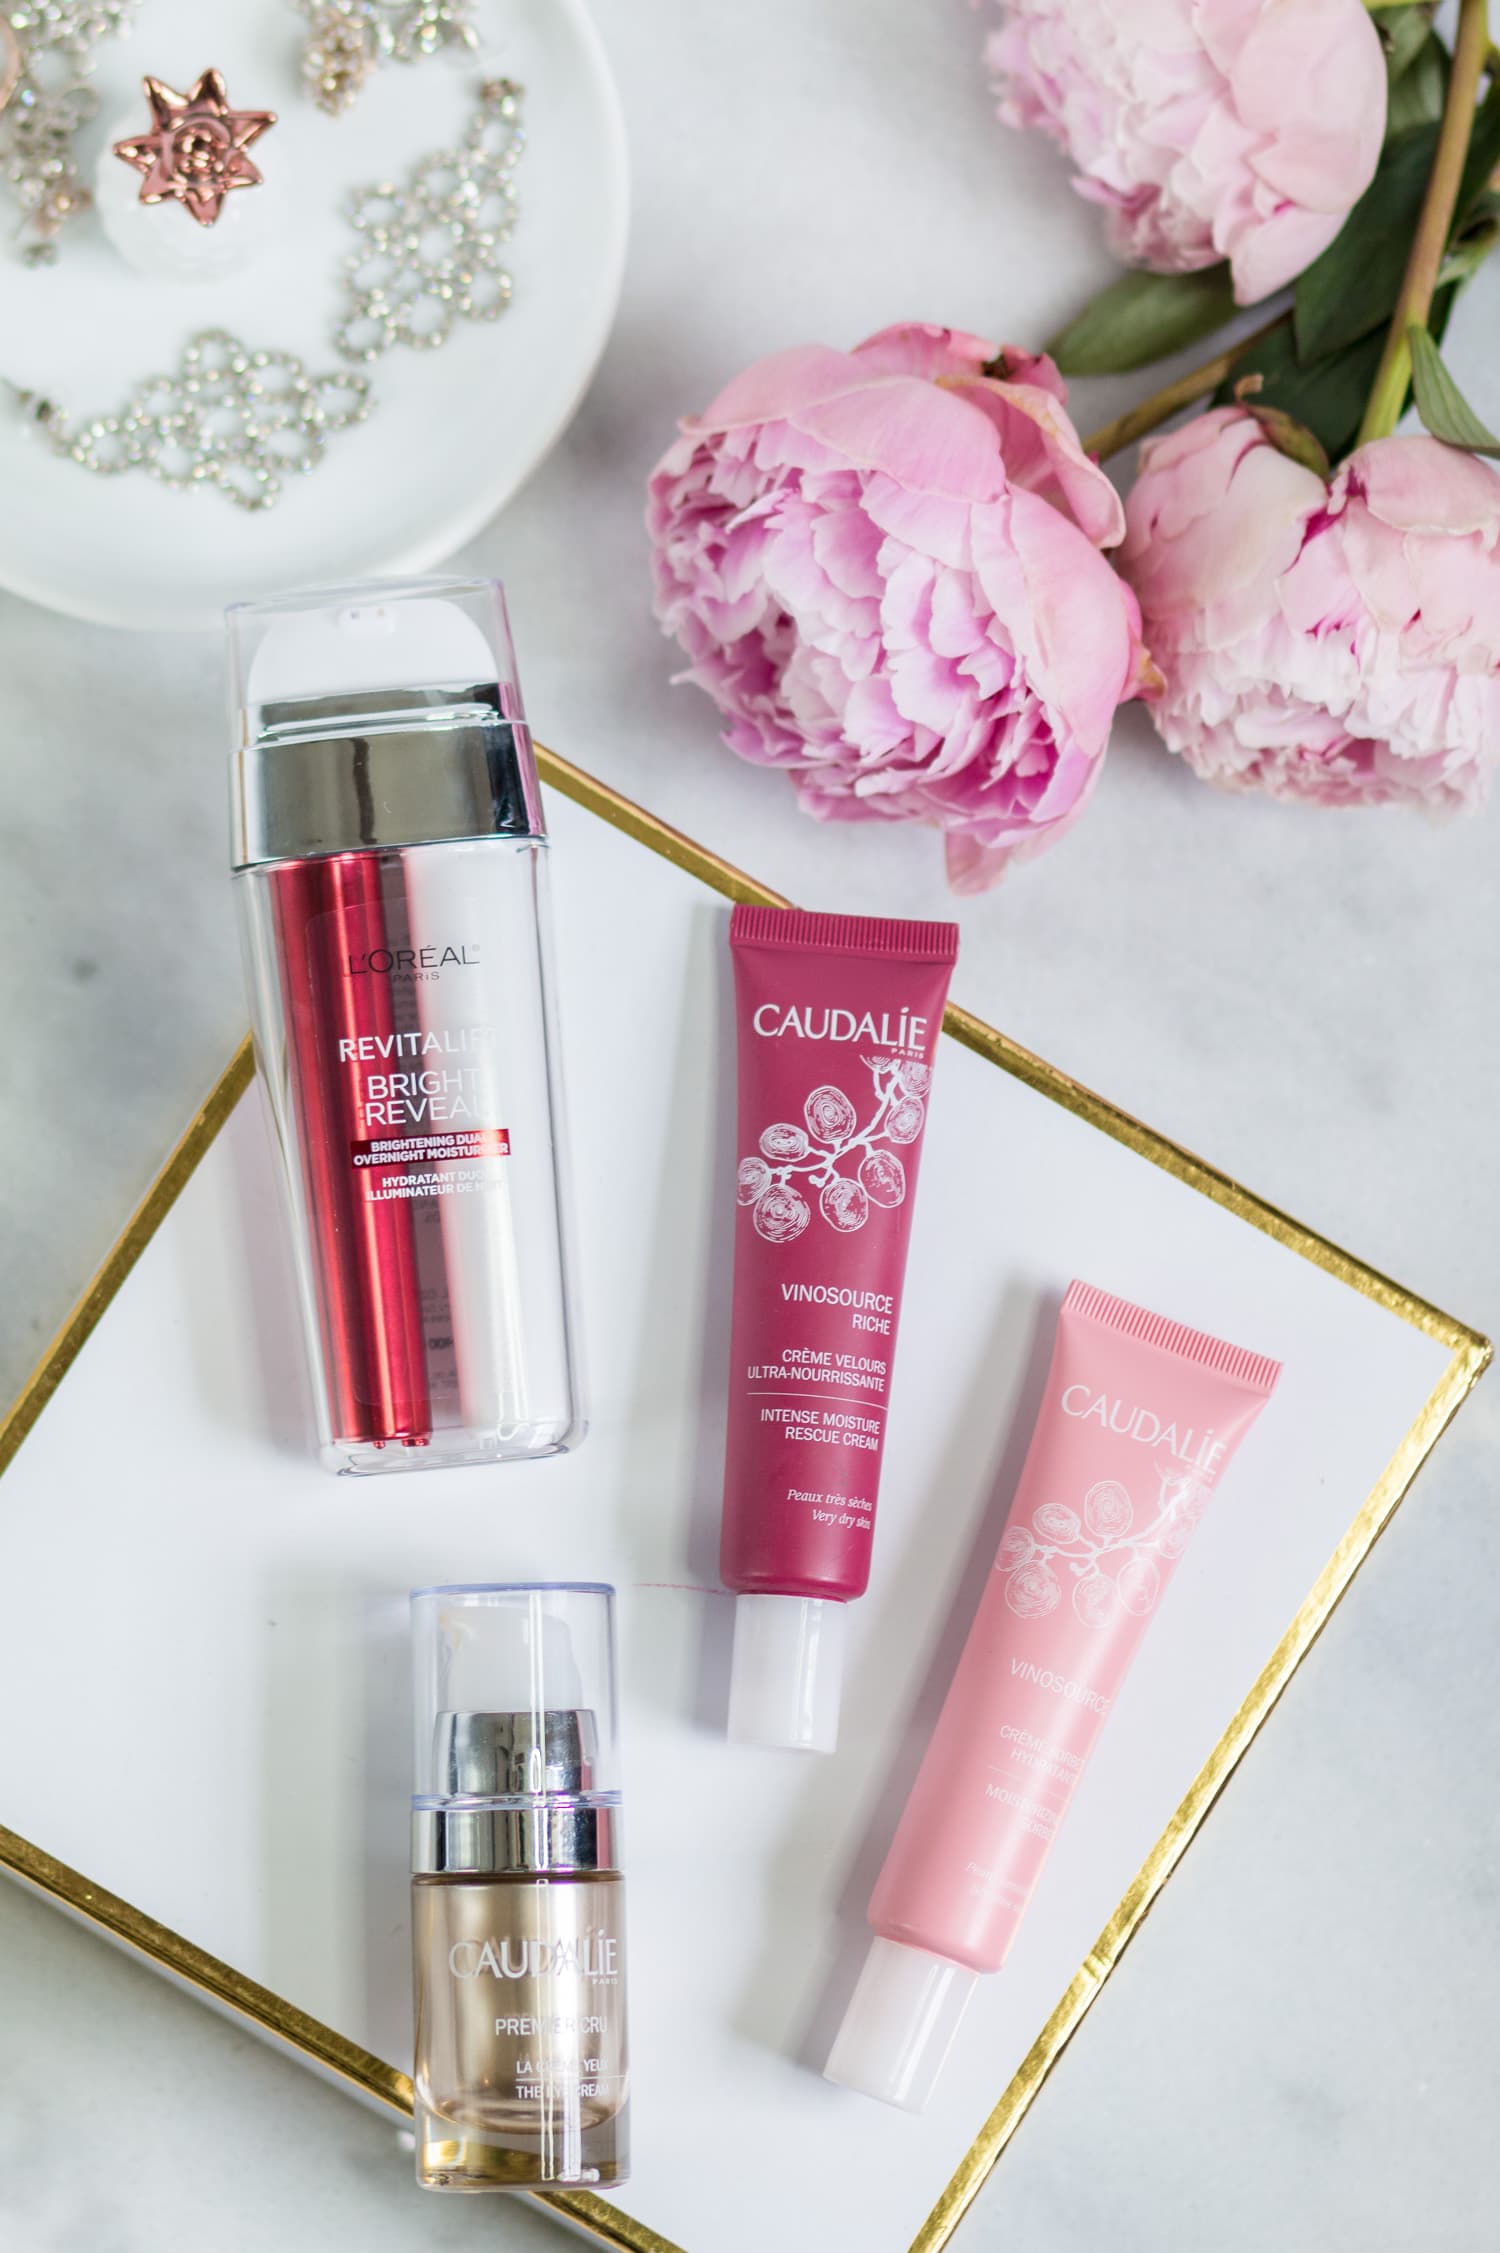 The best new skincare products for women in their 20s - including the best anti-aging moisturizers and eye creams + a review of L’ORÉAL Revitalift Bright Reveal Dual Overnight Moisturizer, Caudalie Vinosource Intense Moisture Rescue Cream, Caudalie Vinosource Moisturizing Sorbet, and Caudalie Premier Cru Eye Cream by beauty blogger Ashley Brooke Nicholas